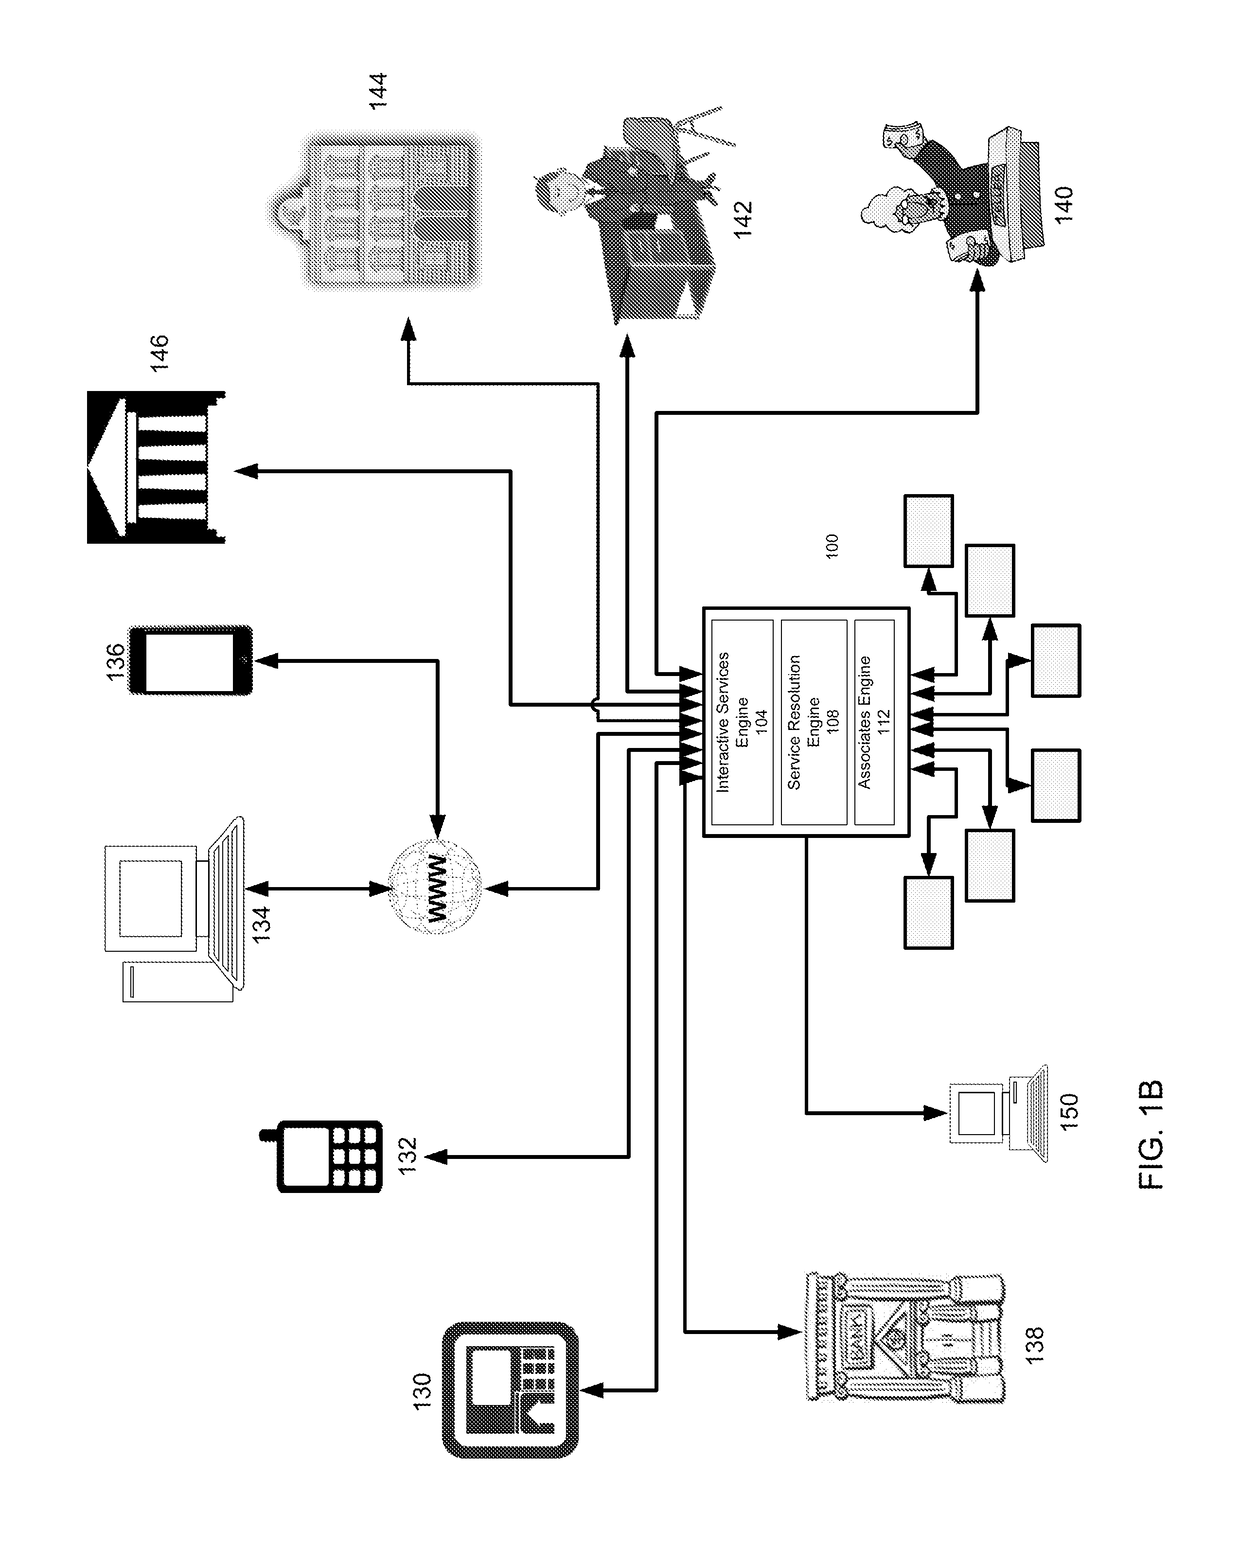 Enterprise fulfillment system with dynamic prefetching, secured data access, system monitoring, and performance optimization capabilities